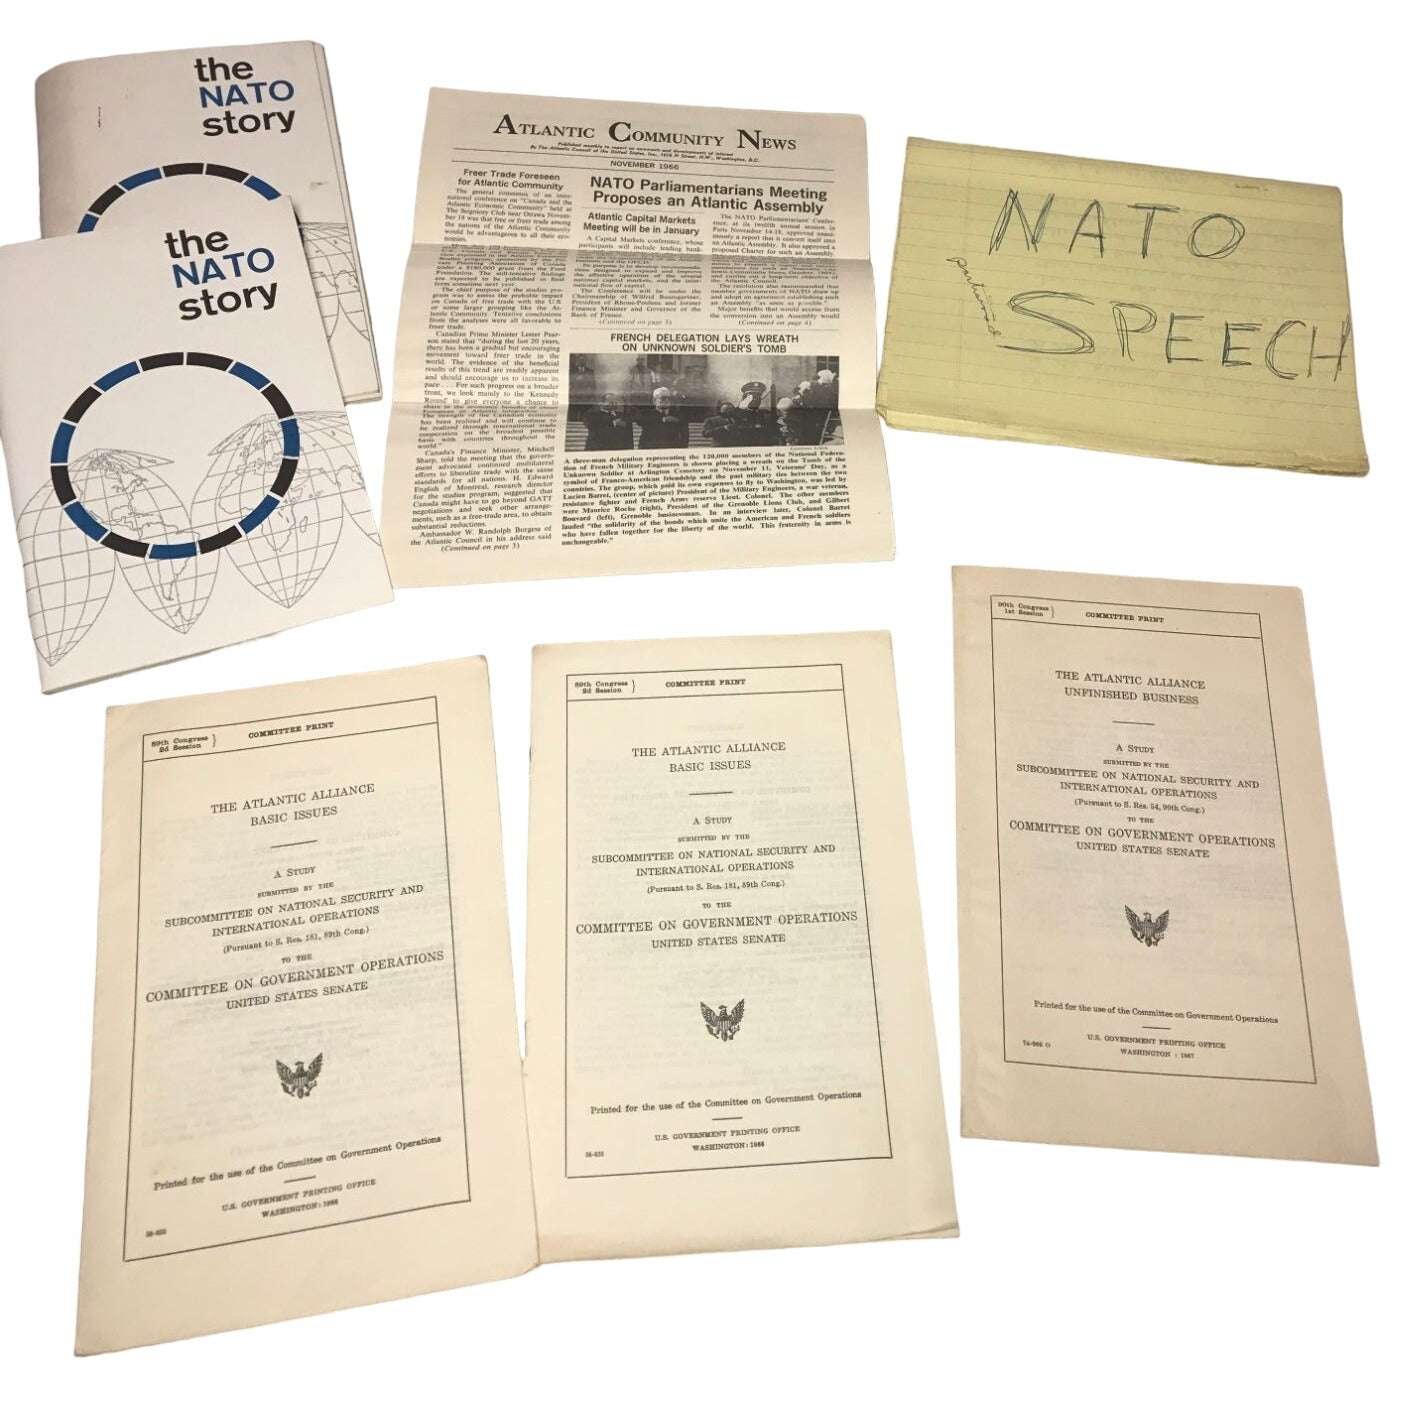 NATO - pamphlets - program - speech written out - unsure of author - the NATO story